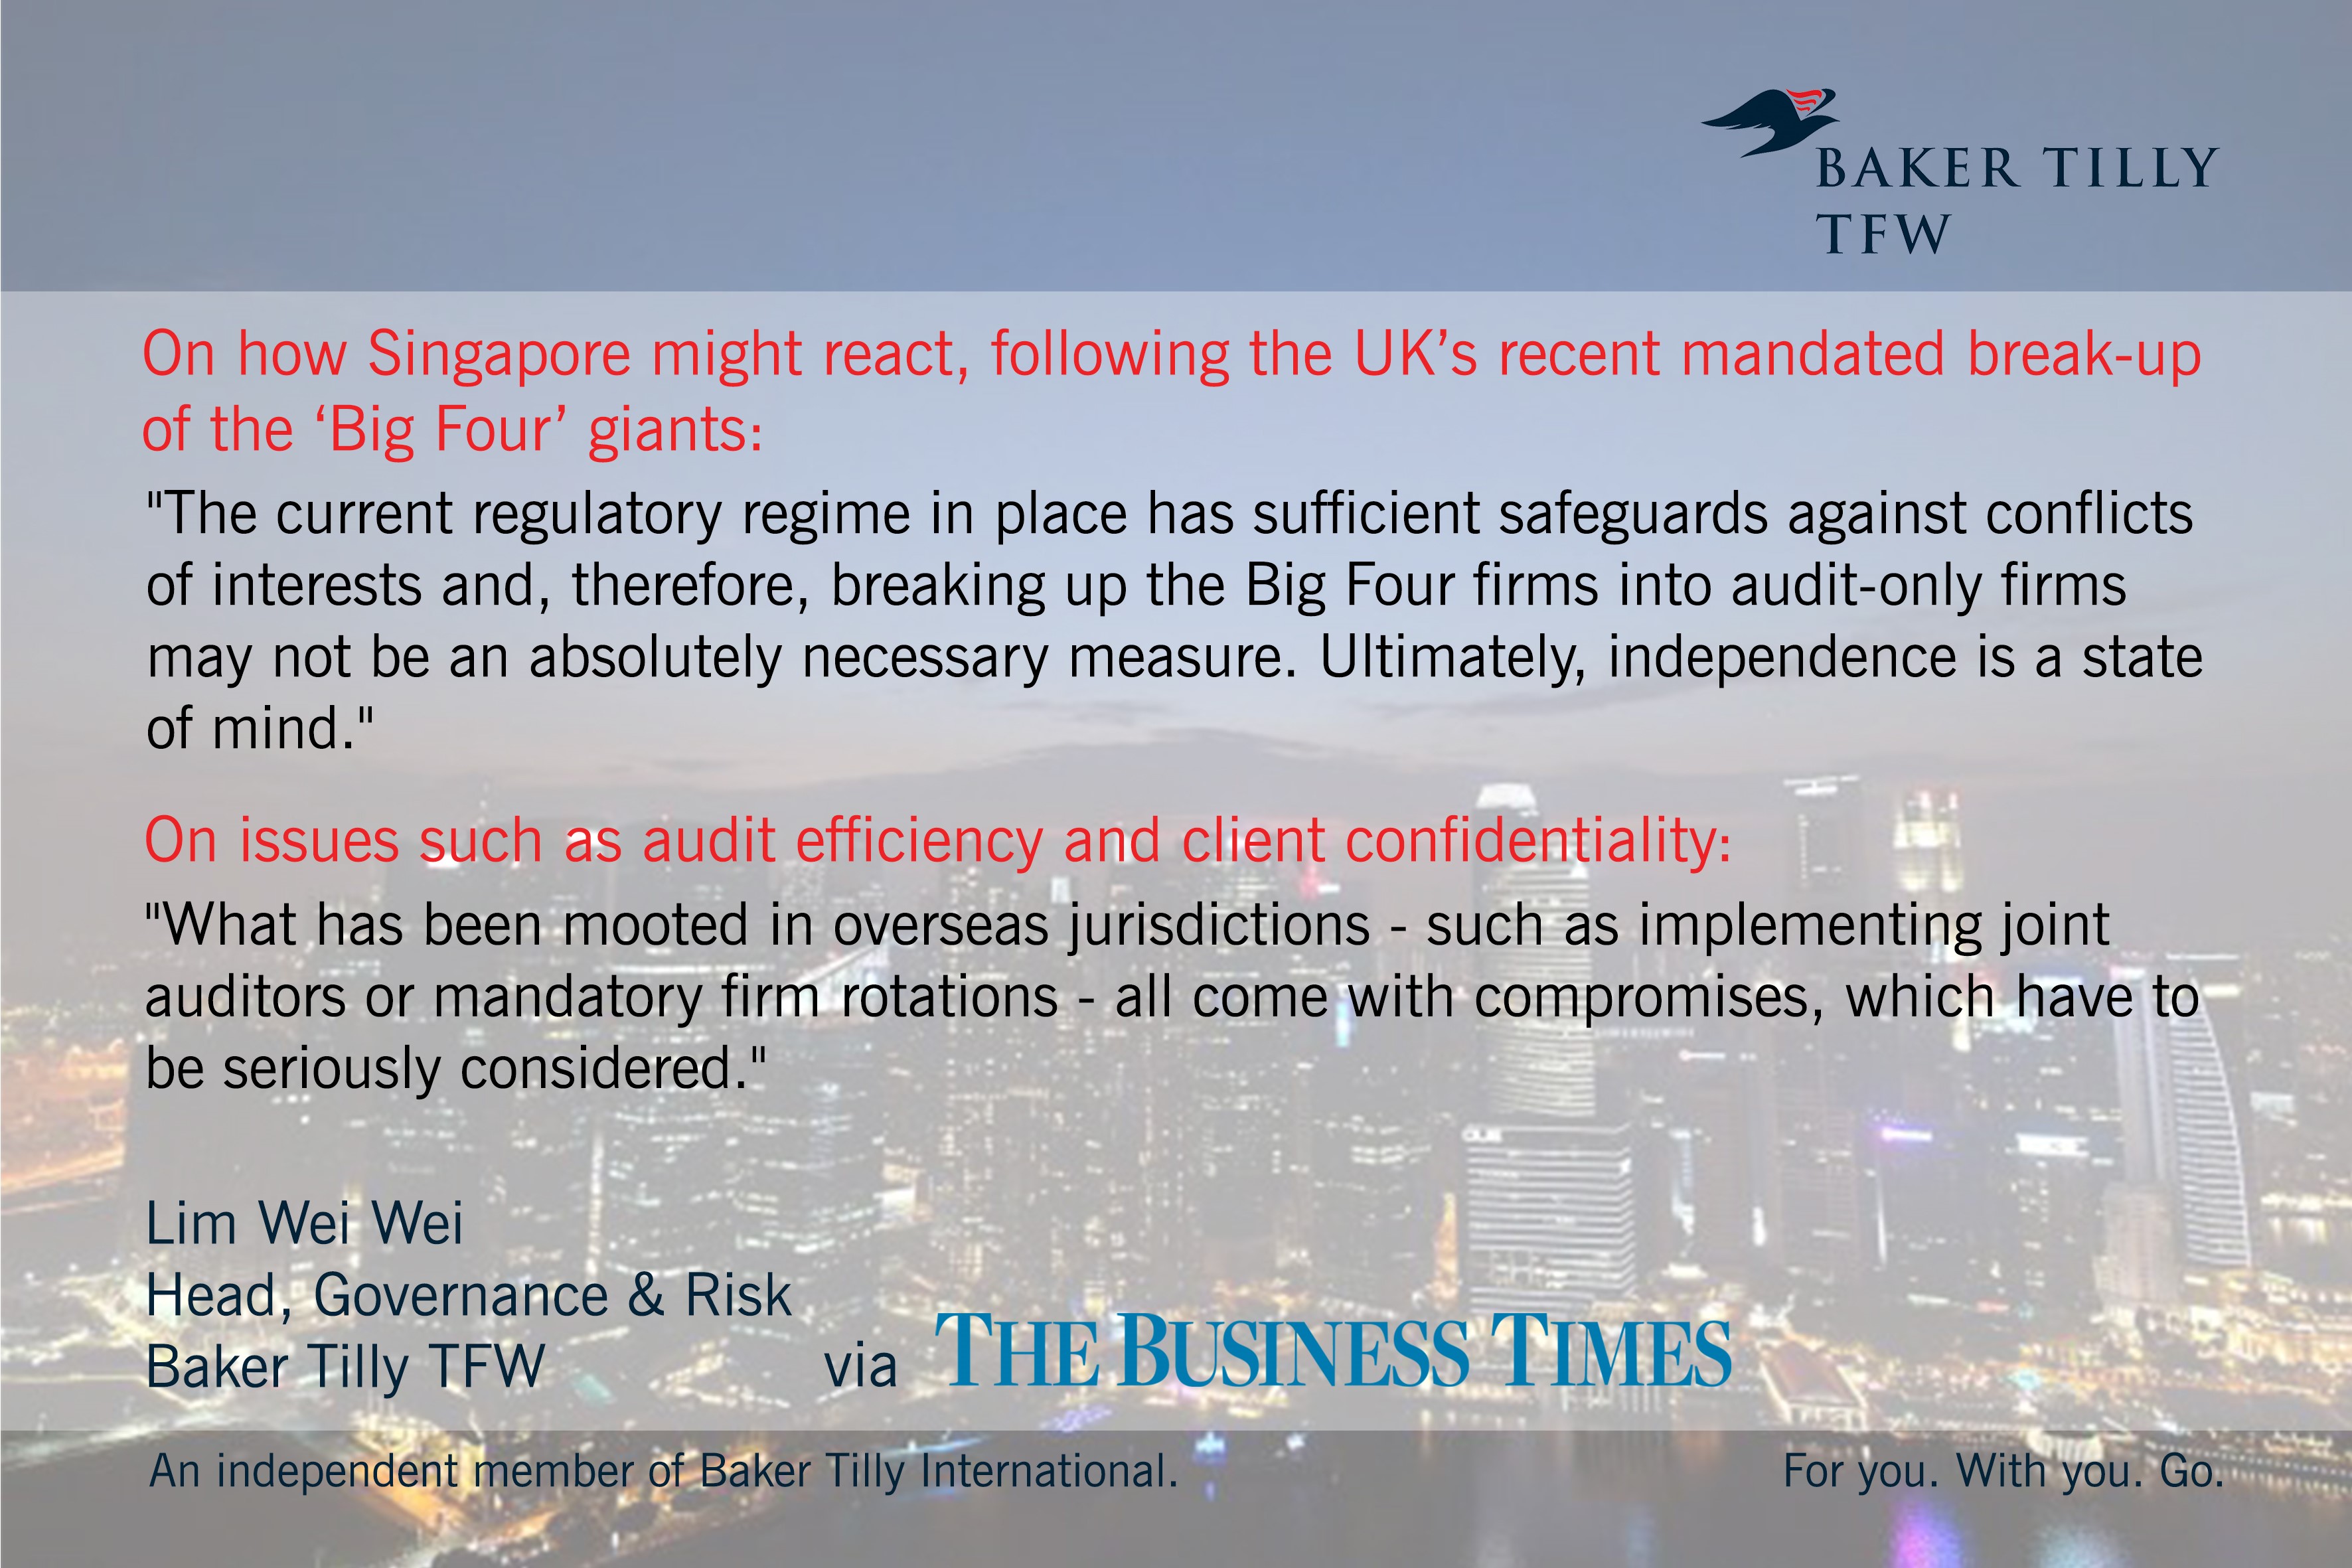 Baker Tilly TFW in The Business Times cover story_29 May 2018